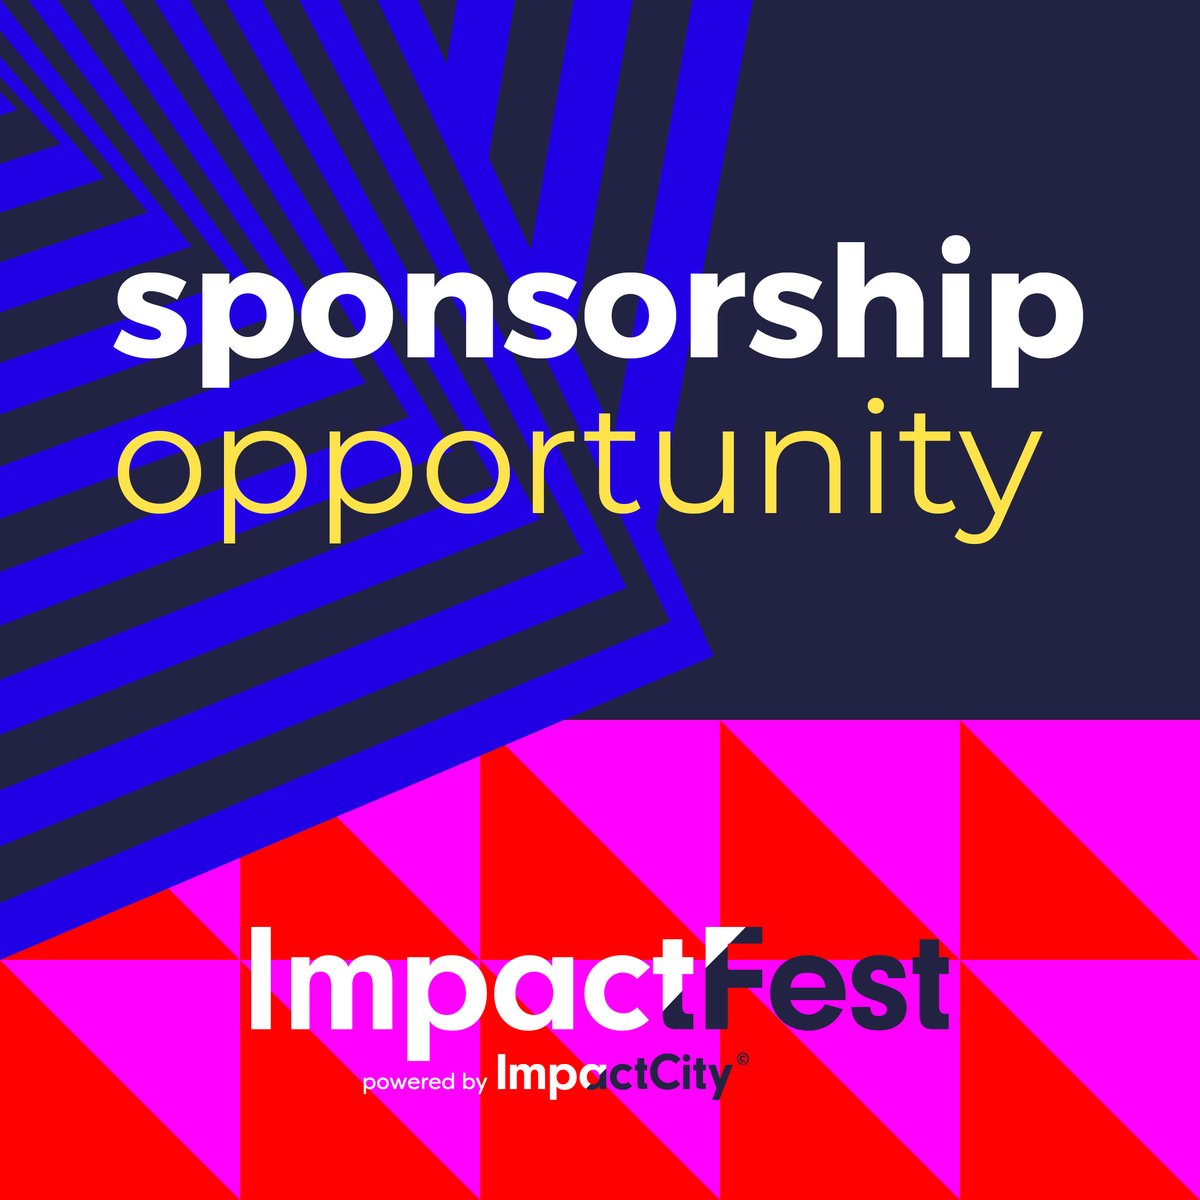 Take your brand visibility to the next level by becoming an official sponsor of #ImpactFest. As Europe’s leading impact meetup, we will help you to show your green mission and connect you to local, national, and international impact makers. Interested? 👉 impactfest.nl/want-to-be-par…